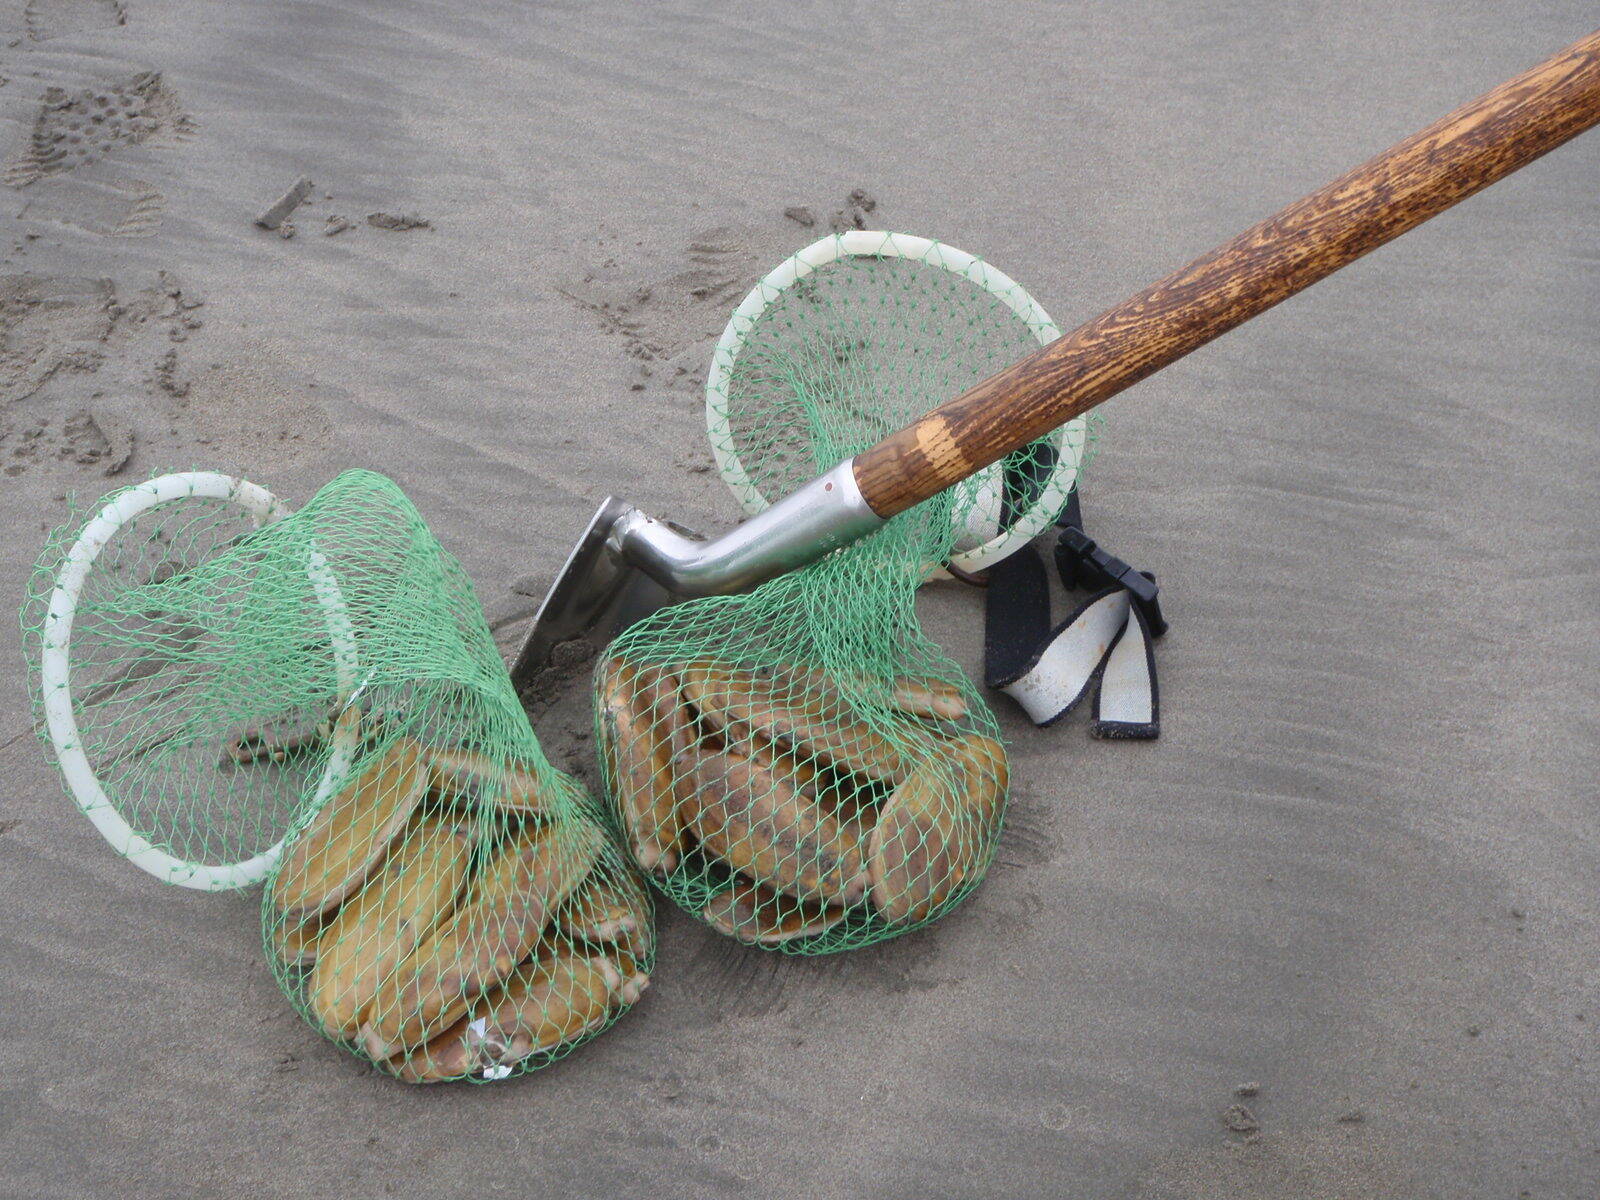 A mesh net holds razor clams. Diggers are required to place their own clams in separate containers.

(Courtesy photo / WDFW)